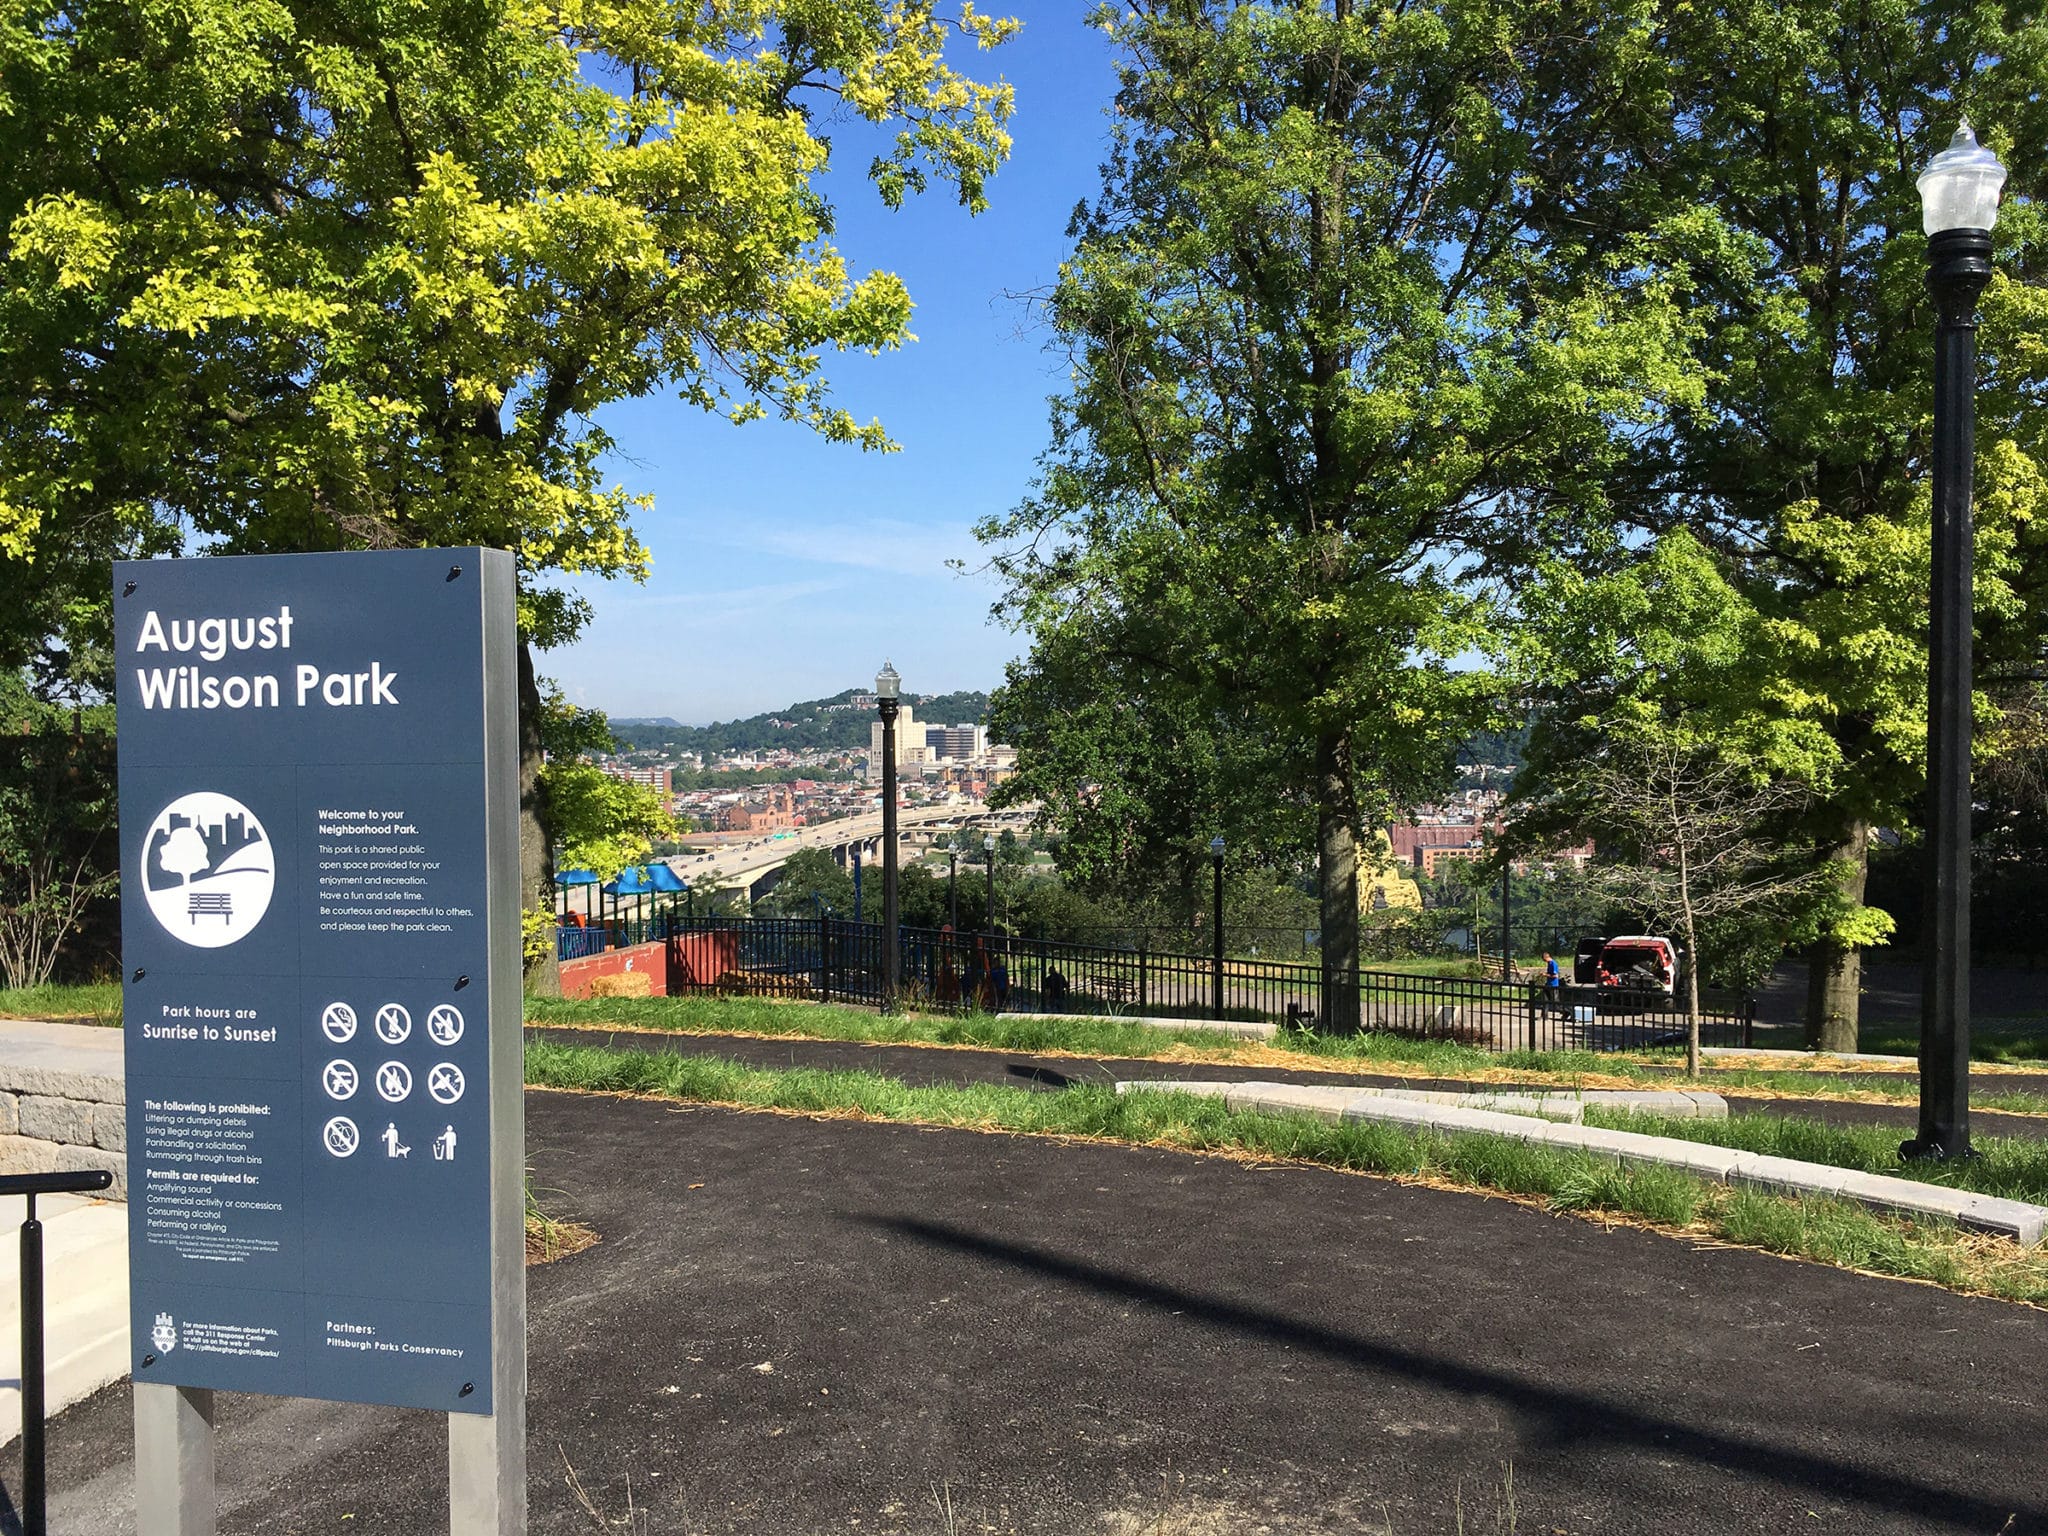 A sign displaying August Wilson Park